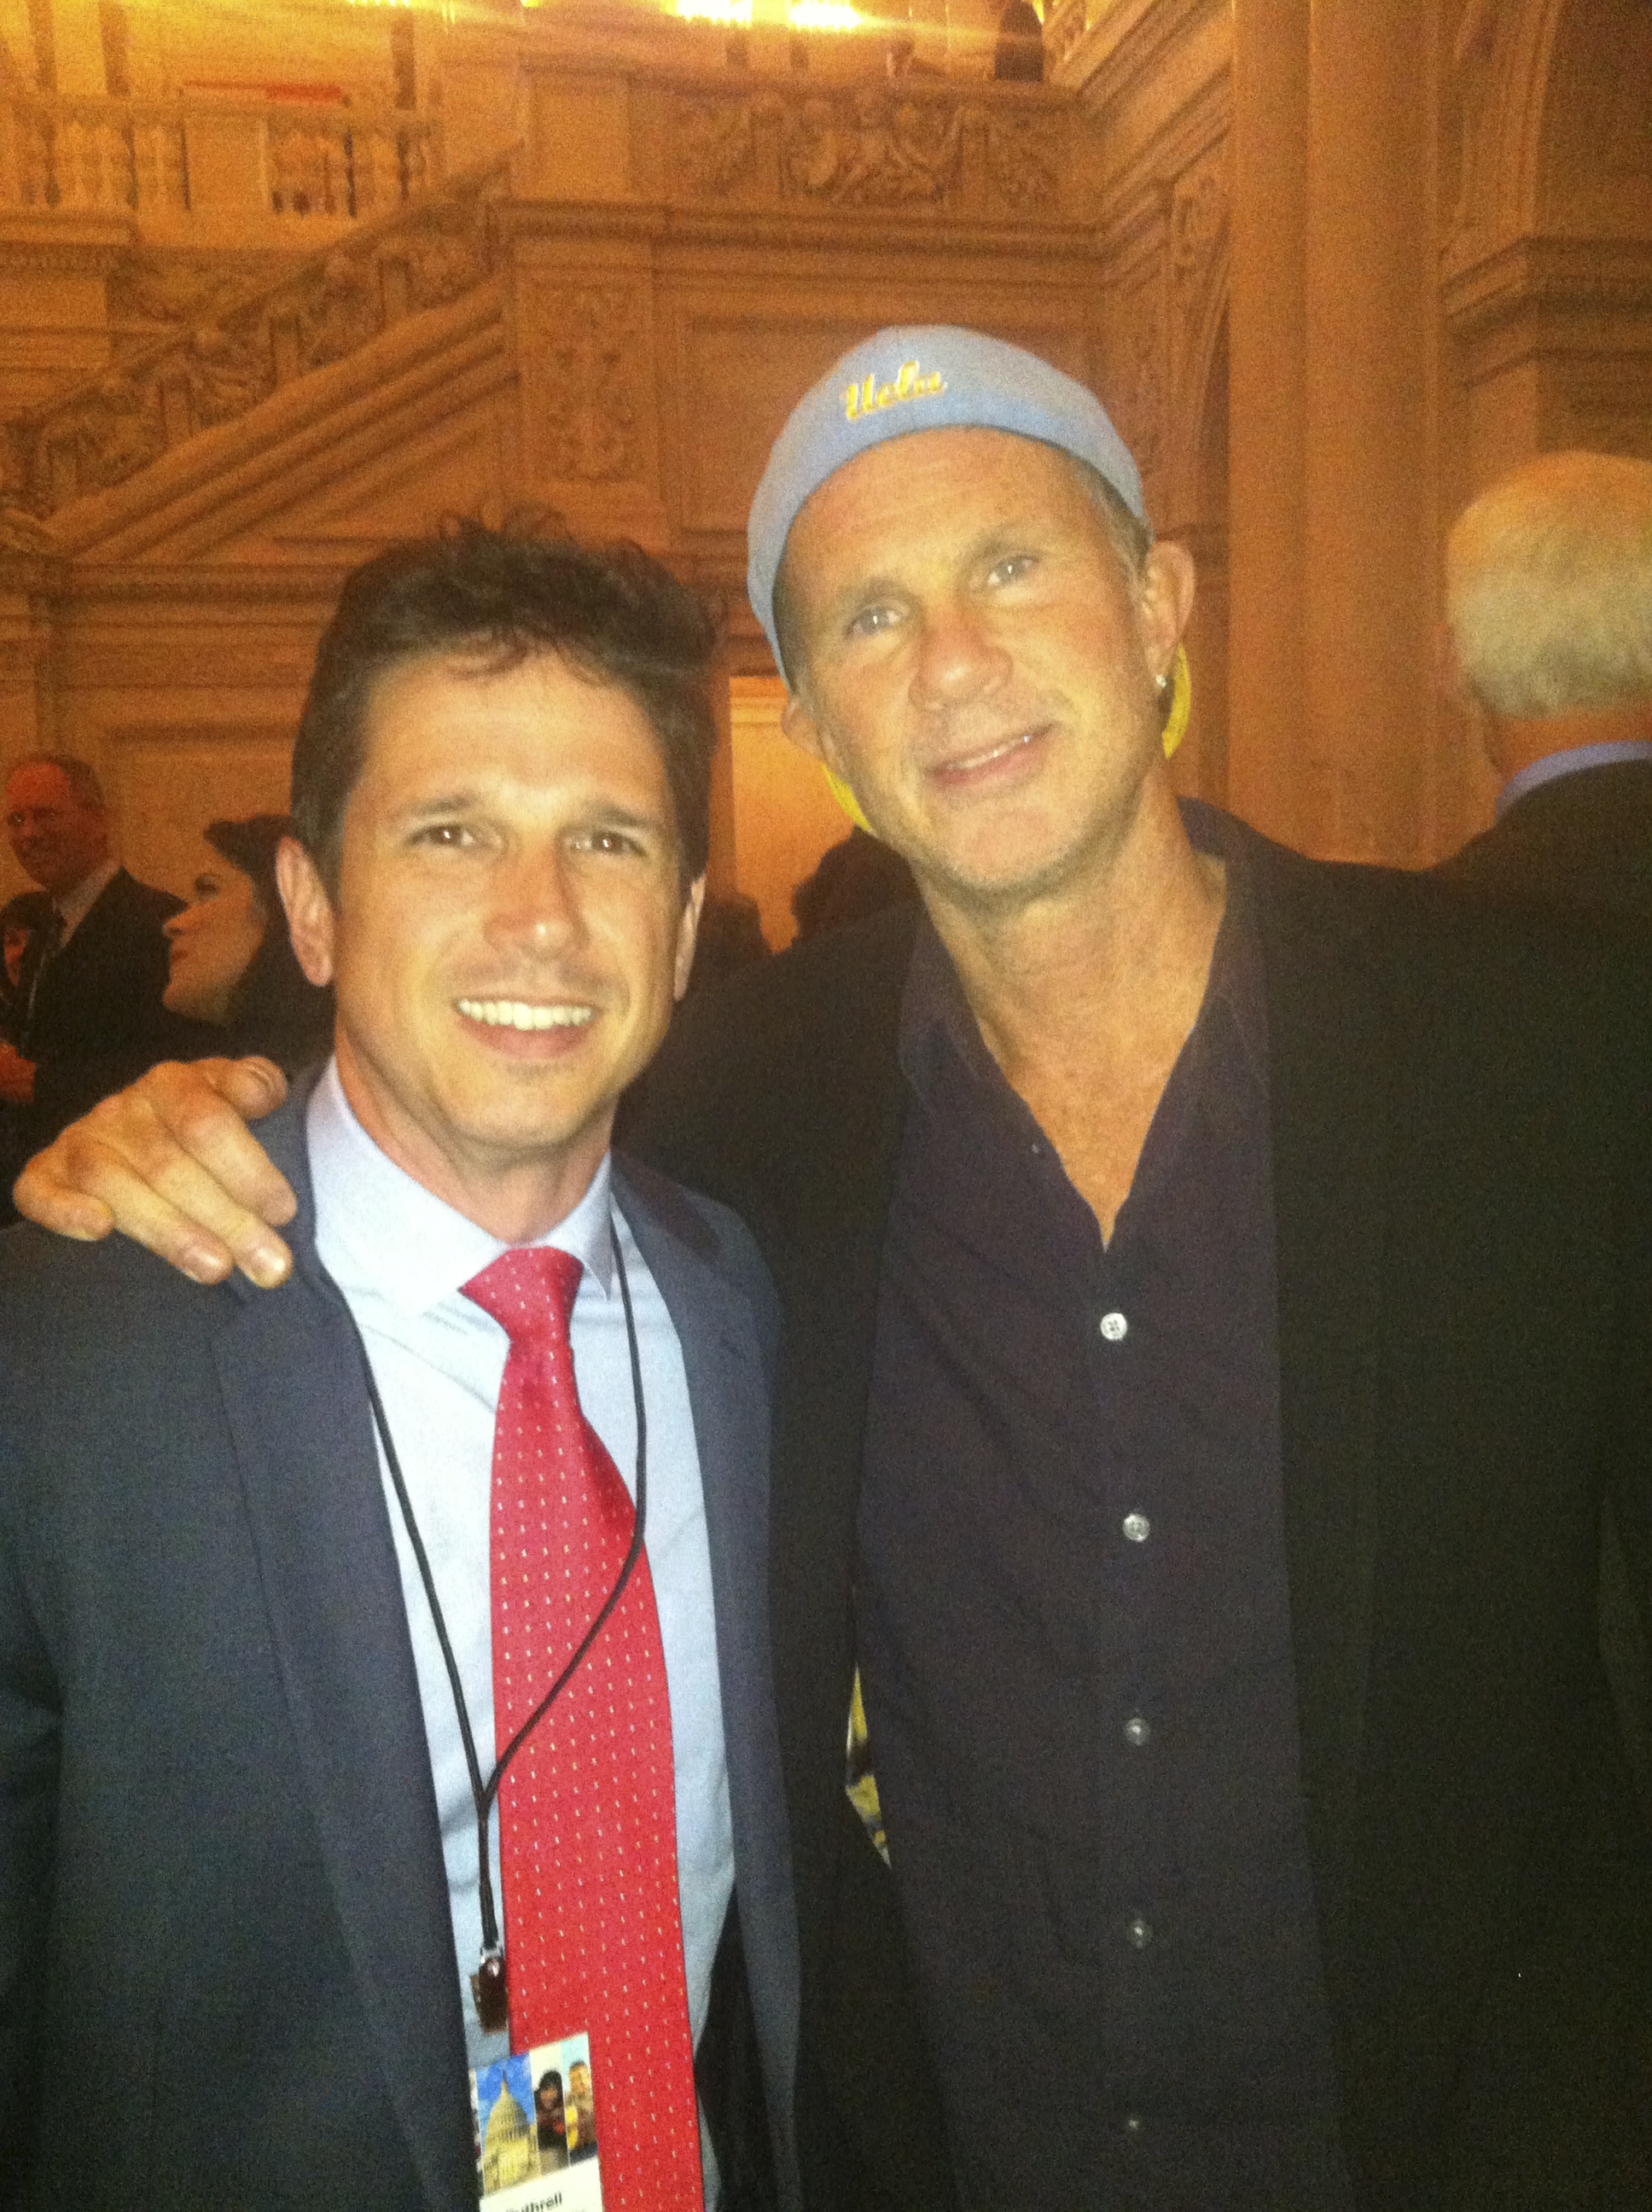 Billy Cuthrell and Chad Smith Red Hot Chili Peppers in DC, last week.